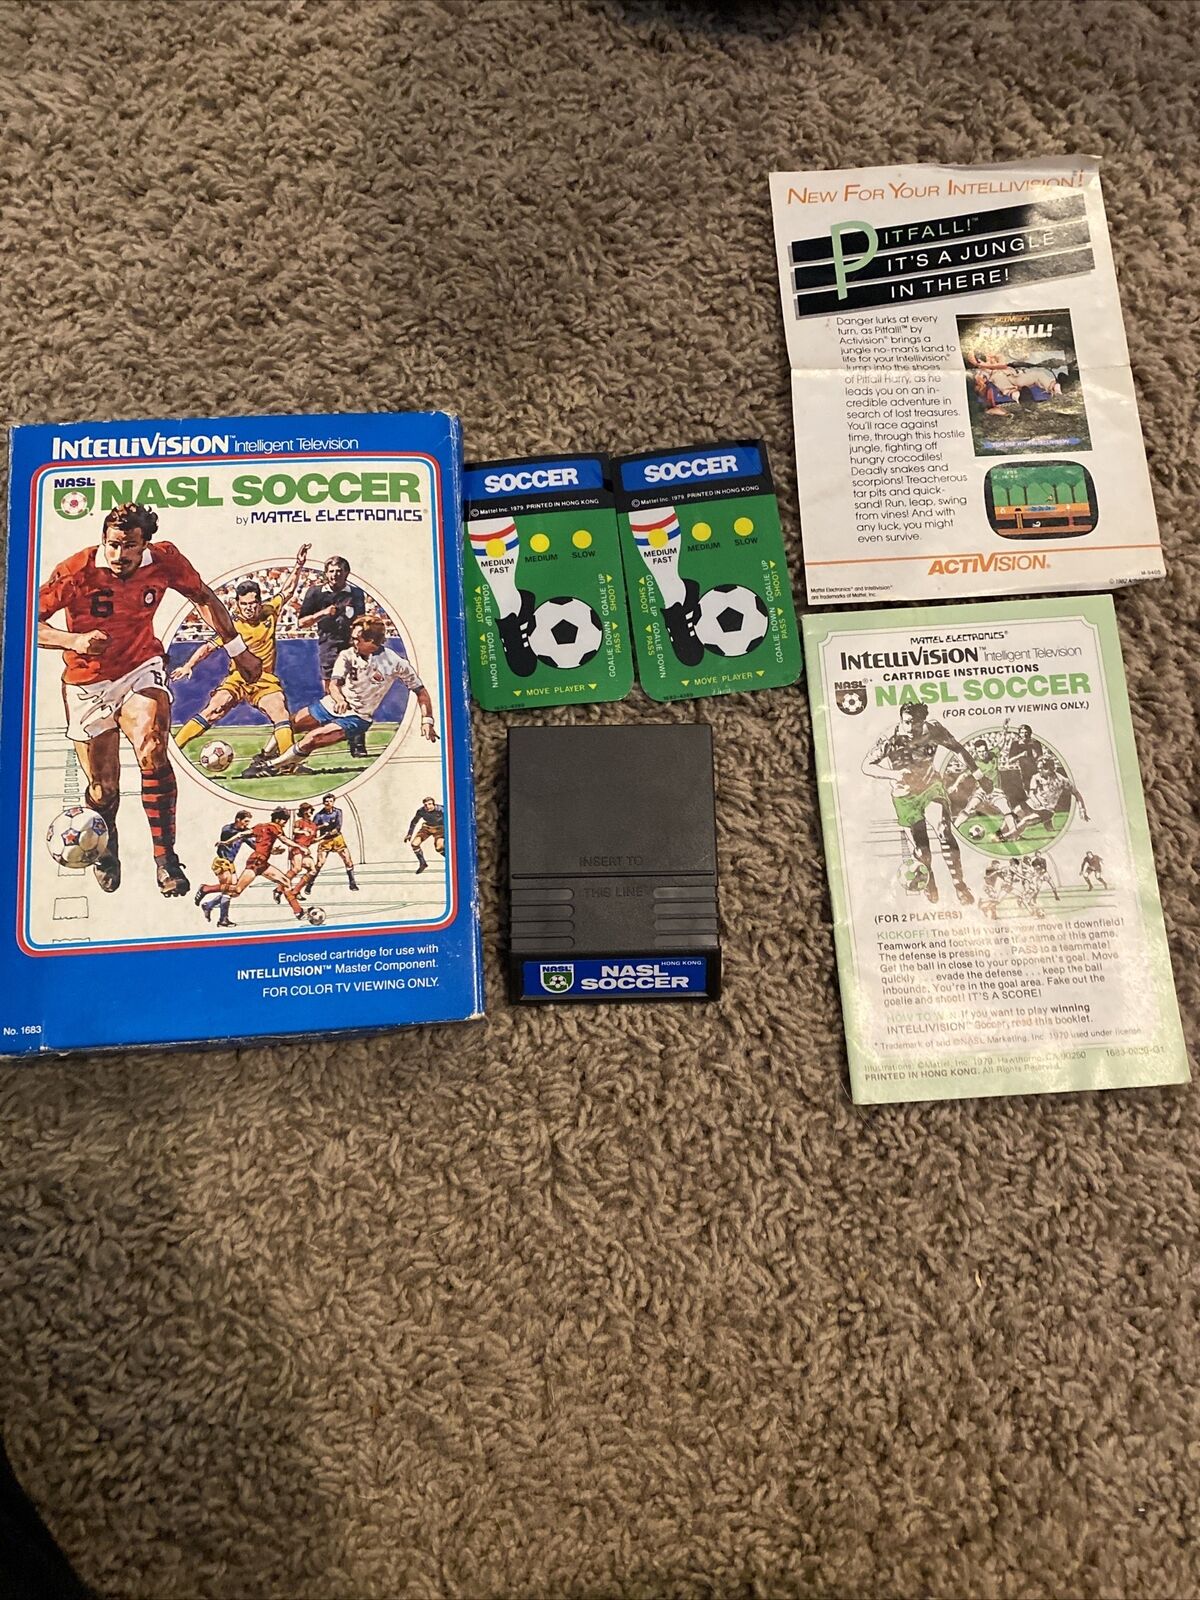 NASL Soccer (Intellivision, 1980) Complete Tested and working